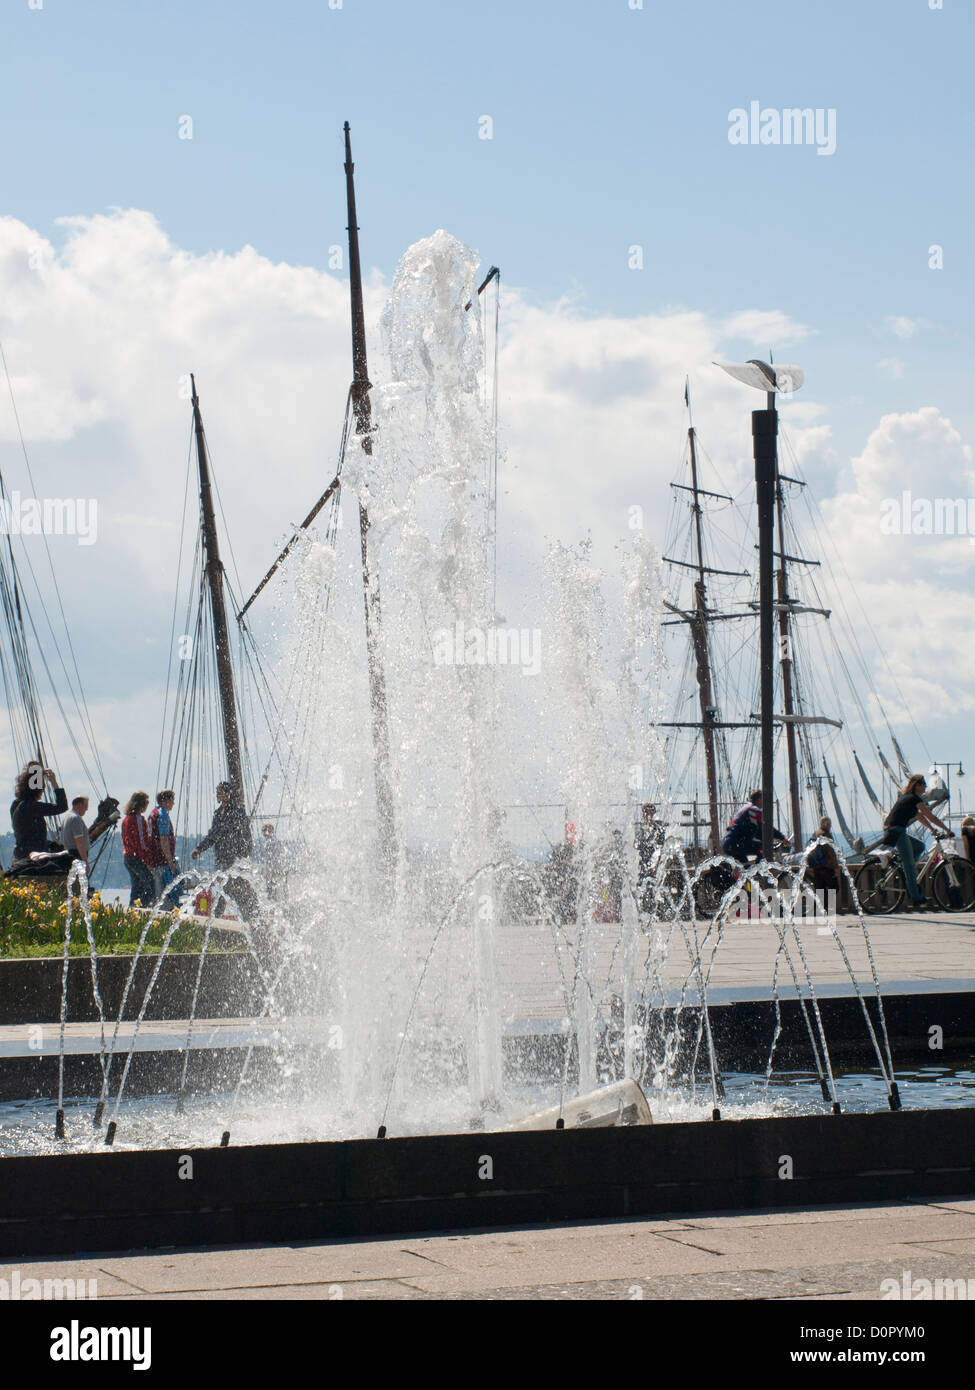 Fountain in Rådhusplassen, city hall square in Oslo Norway with people and sail boats rigs at the back Stock Photo